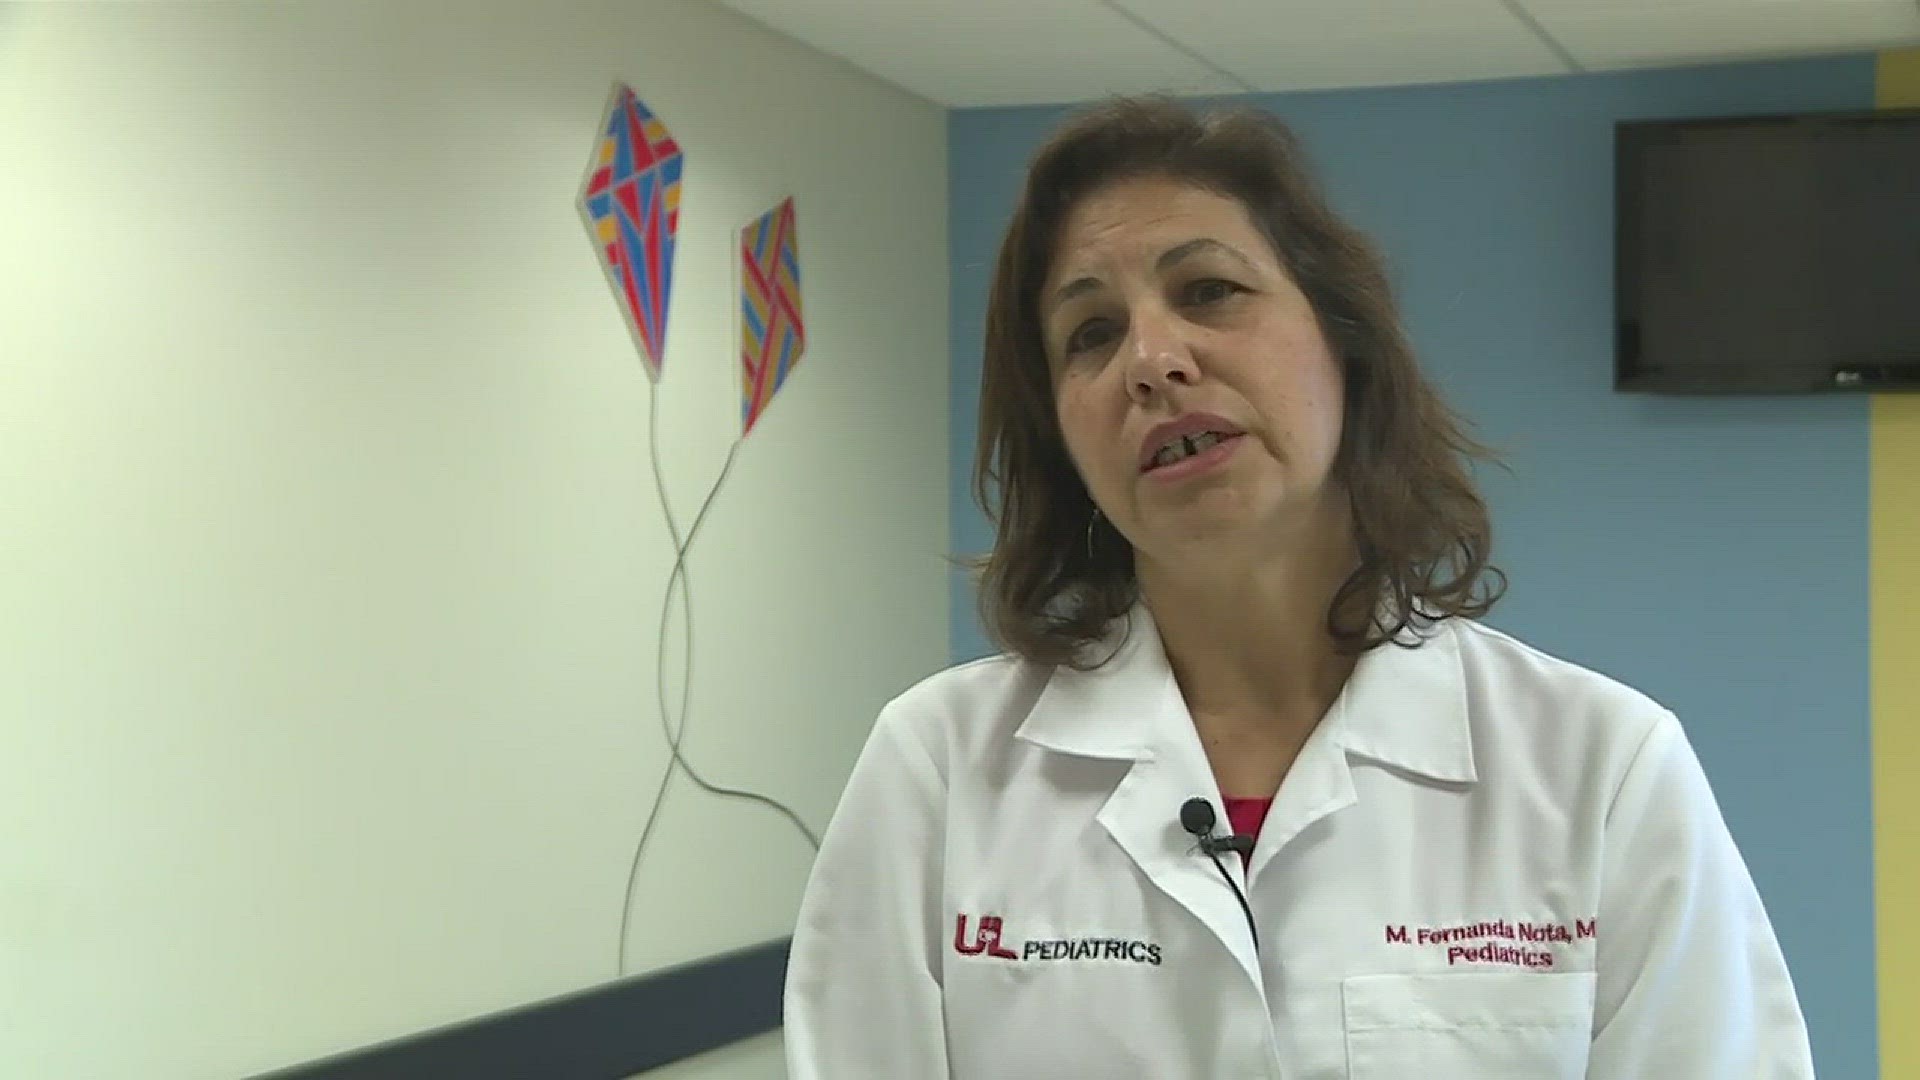 She focuses on immigrant health and children with special needs. Nota also leads a support program for Latino families of Children with special needs in Louisville and Lexington called Una Mano Amiga